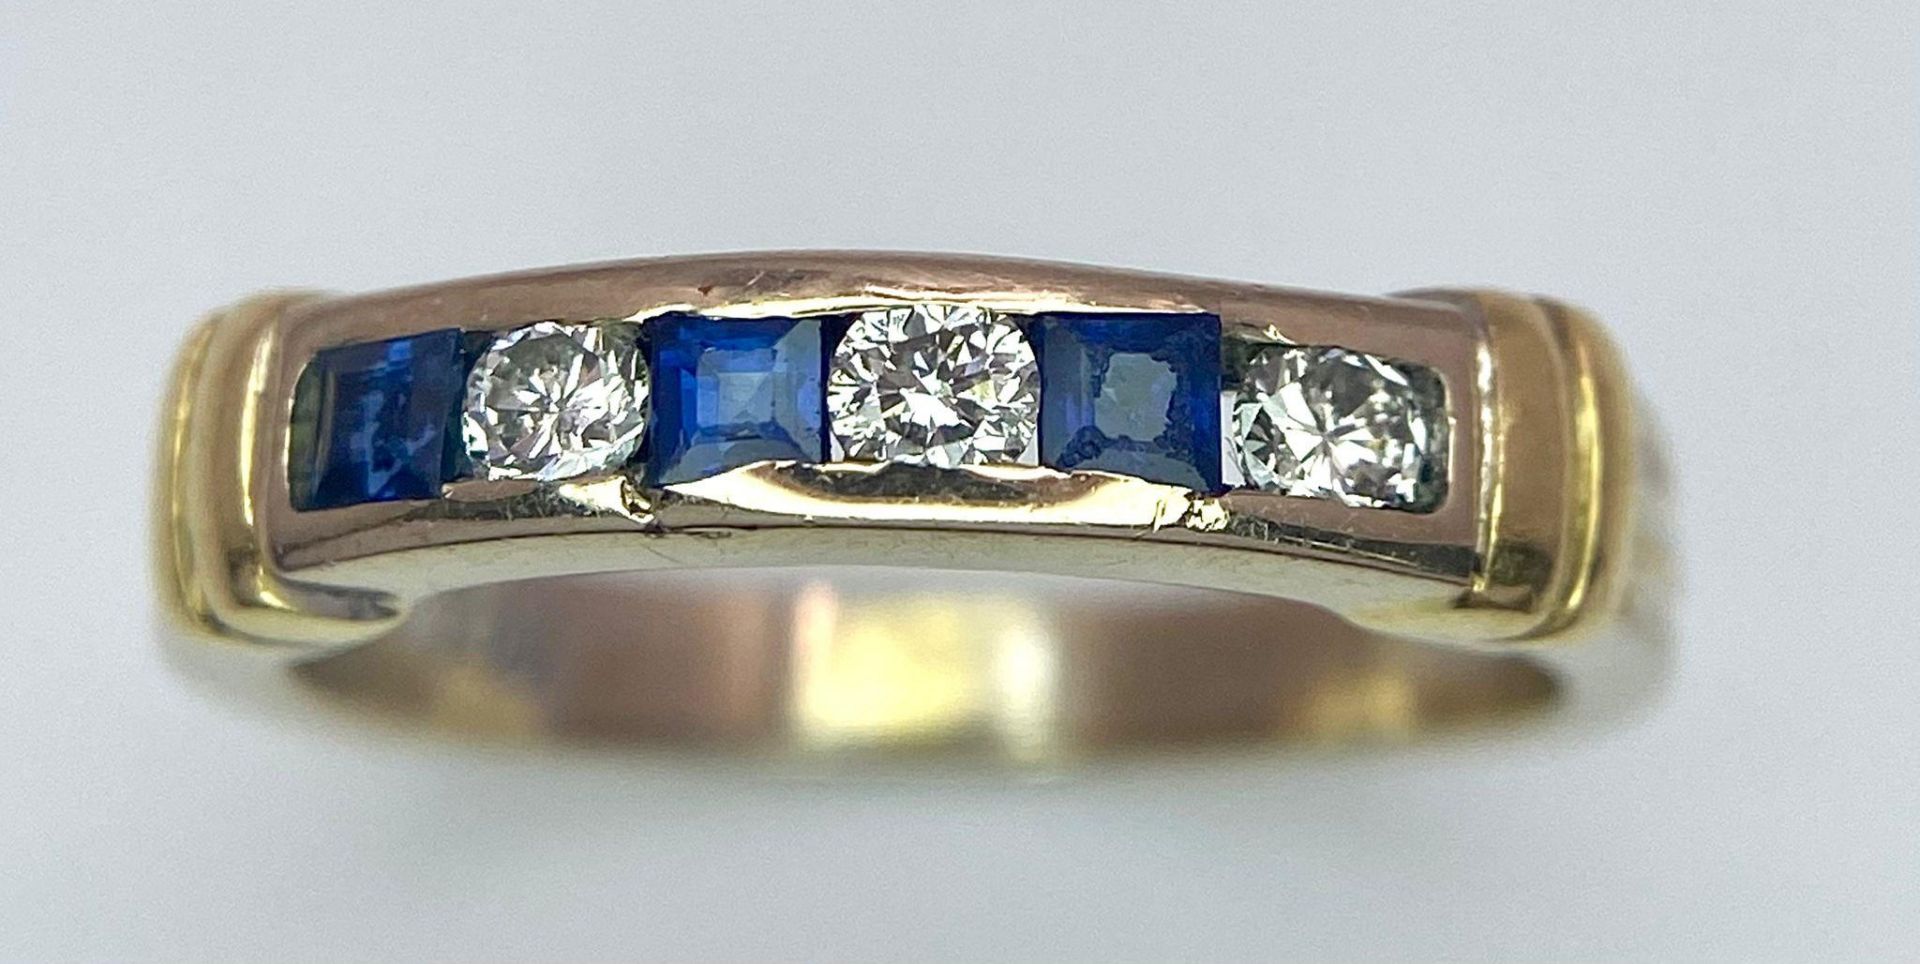 An 18 K yellow gold ring with alternating blue sapphires and diamonds. Size: K, weight: 3.2 g. - Image 4 of 13